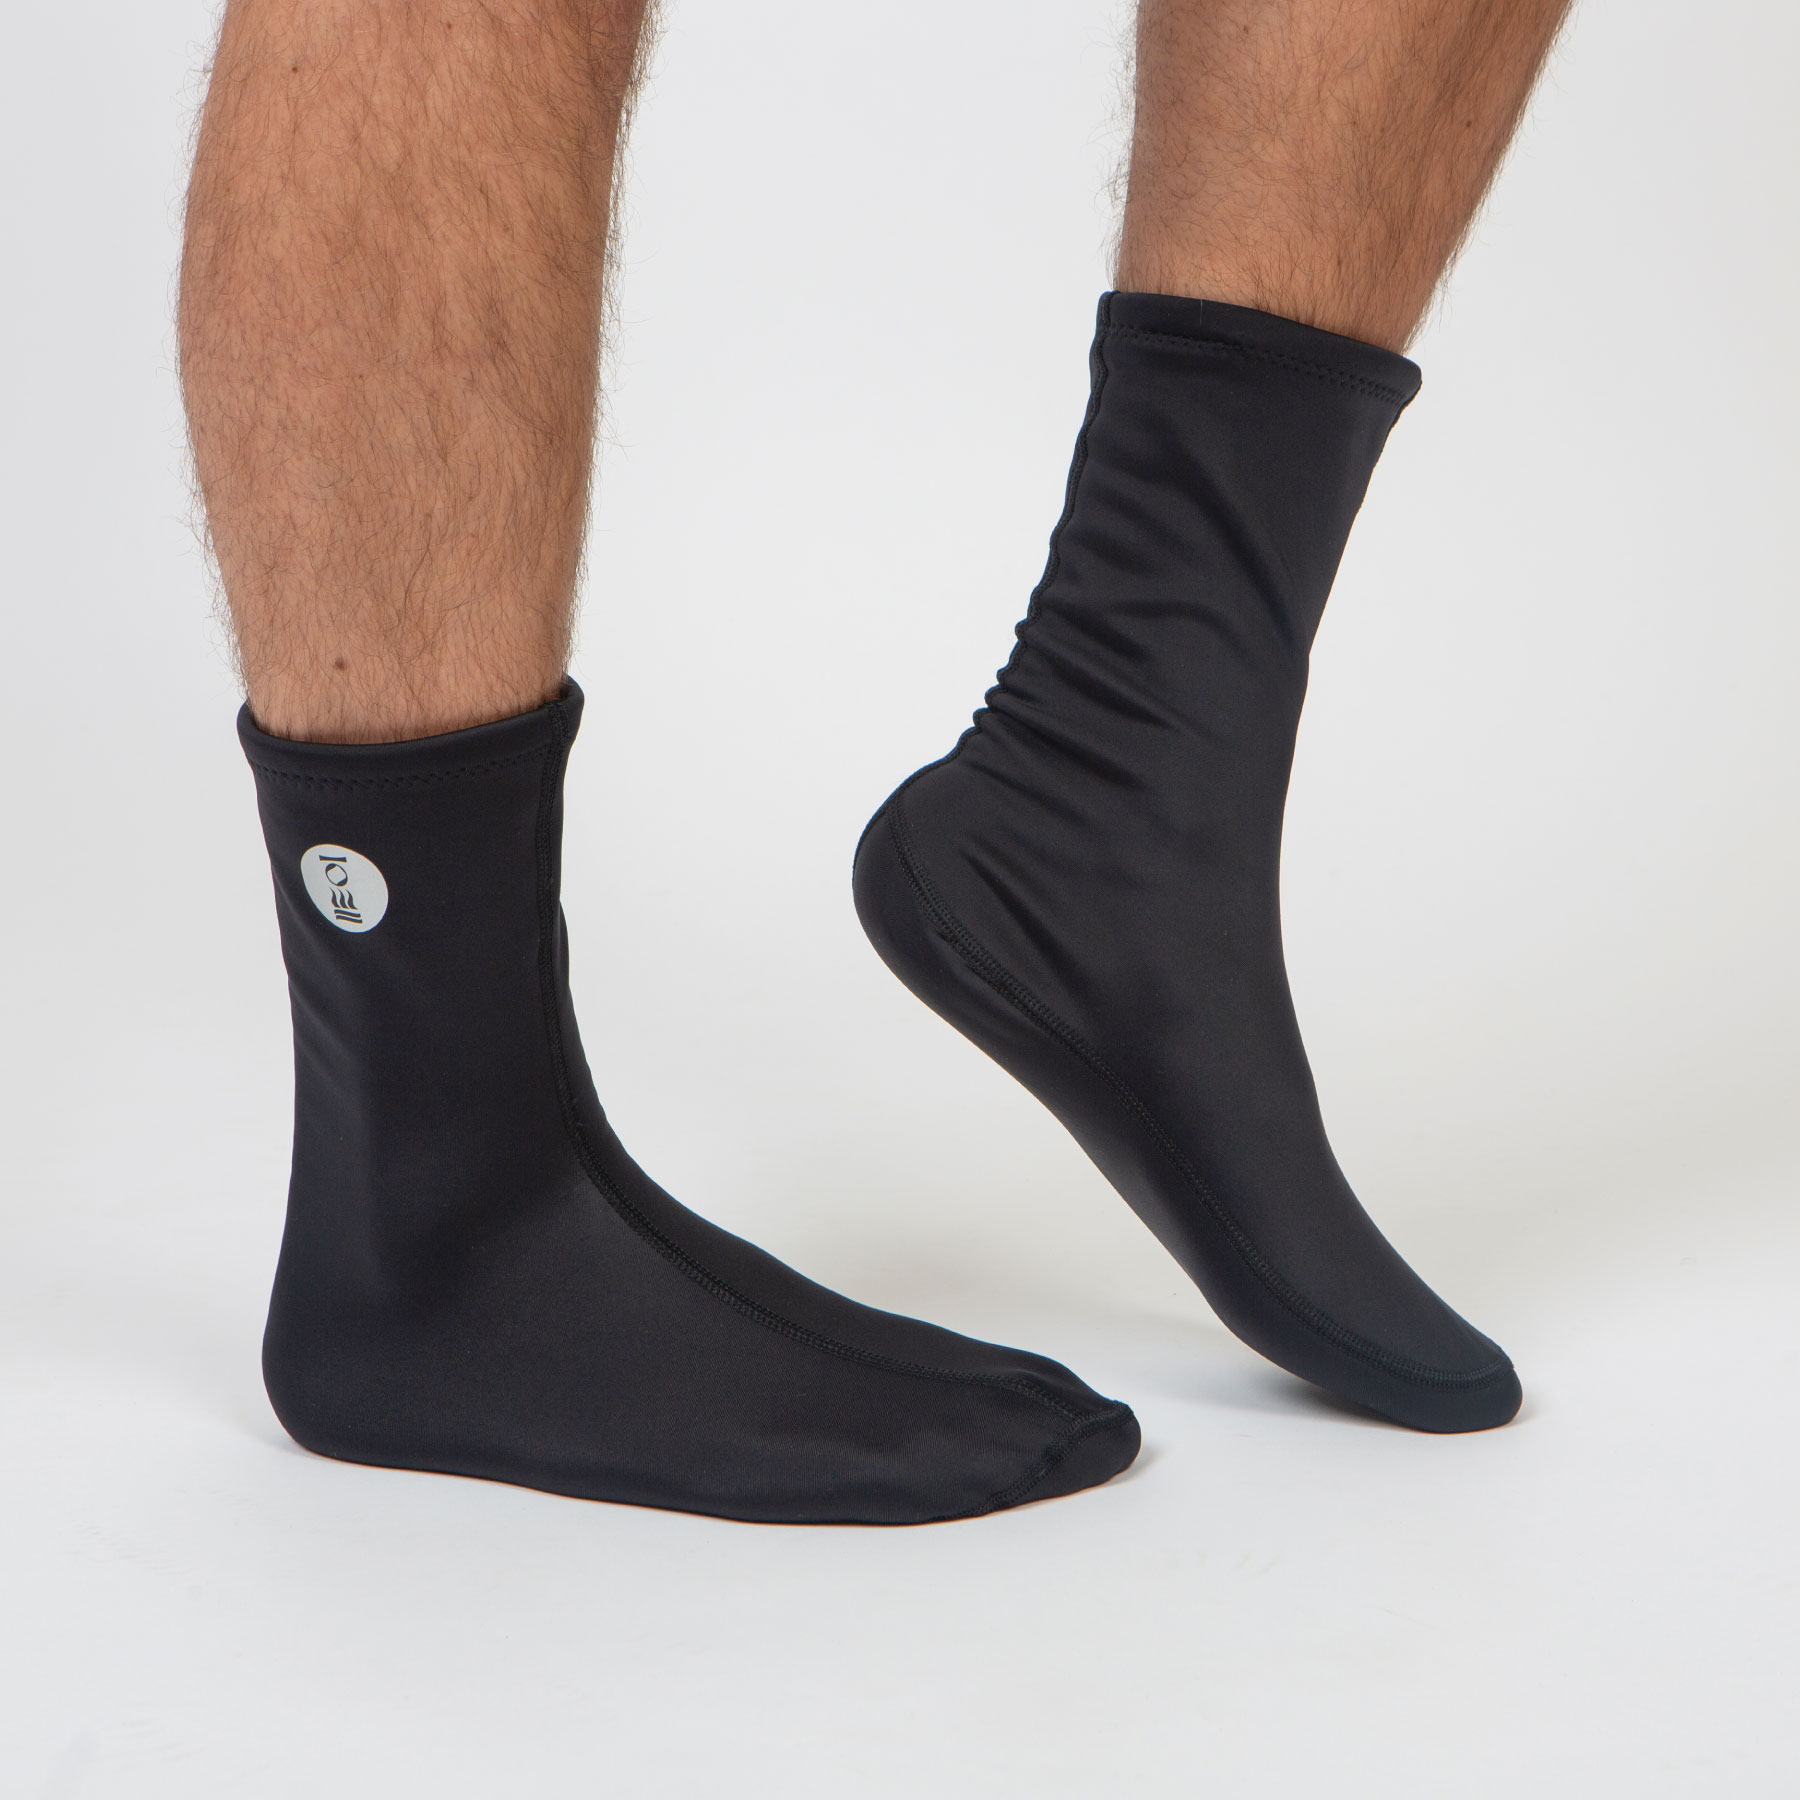 Fourth Element Thermocline Socks - The Honest Diver